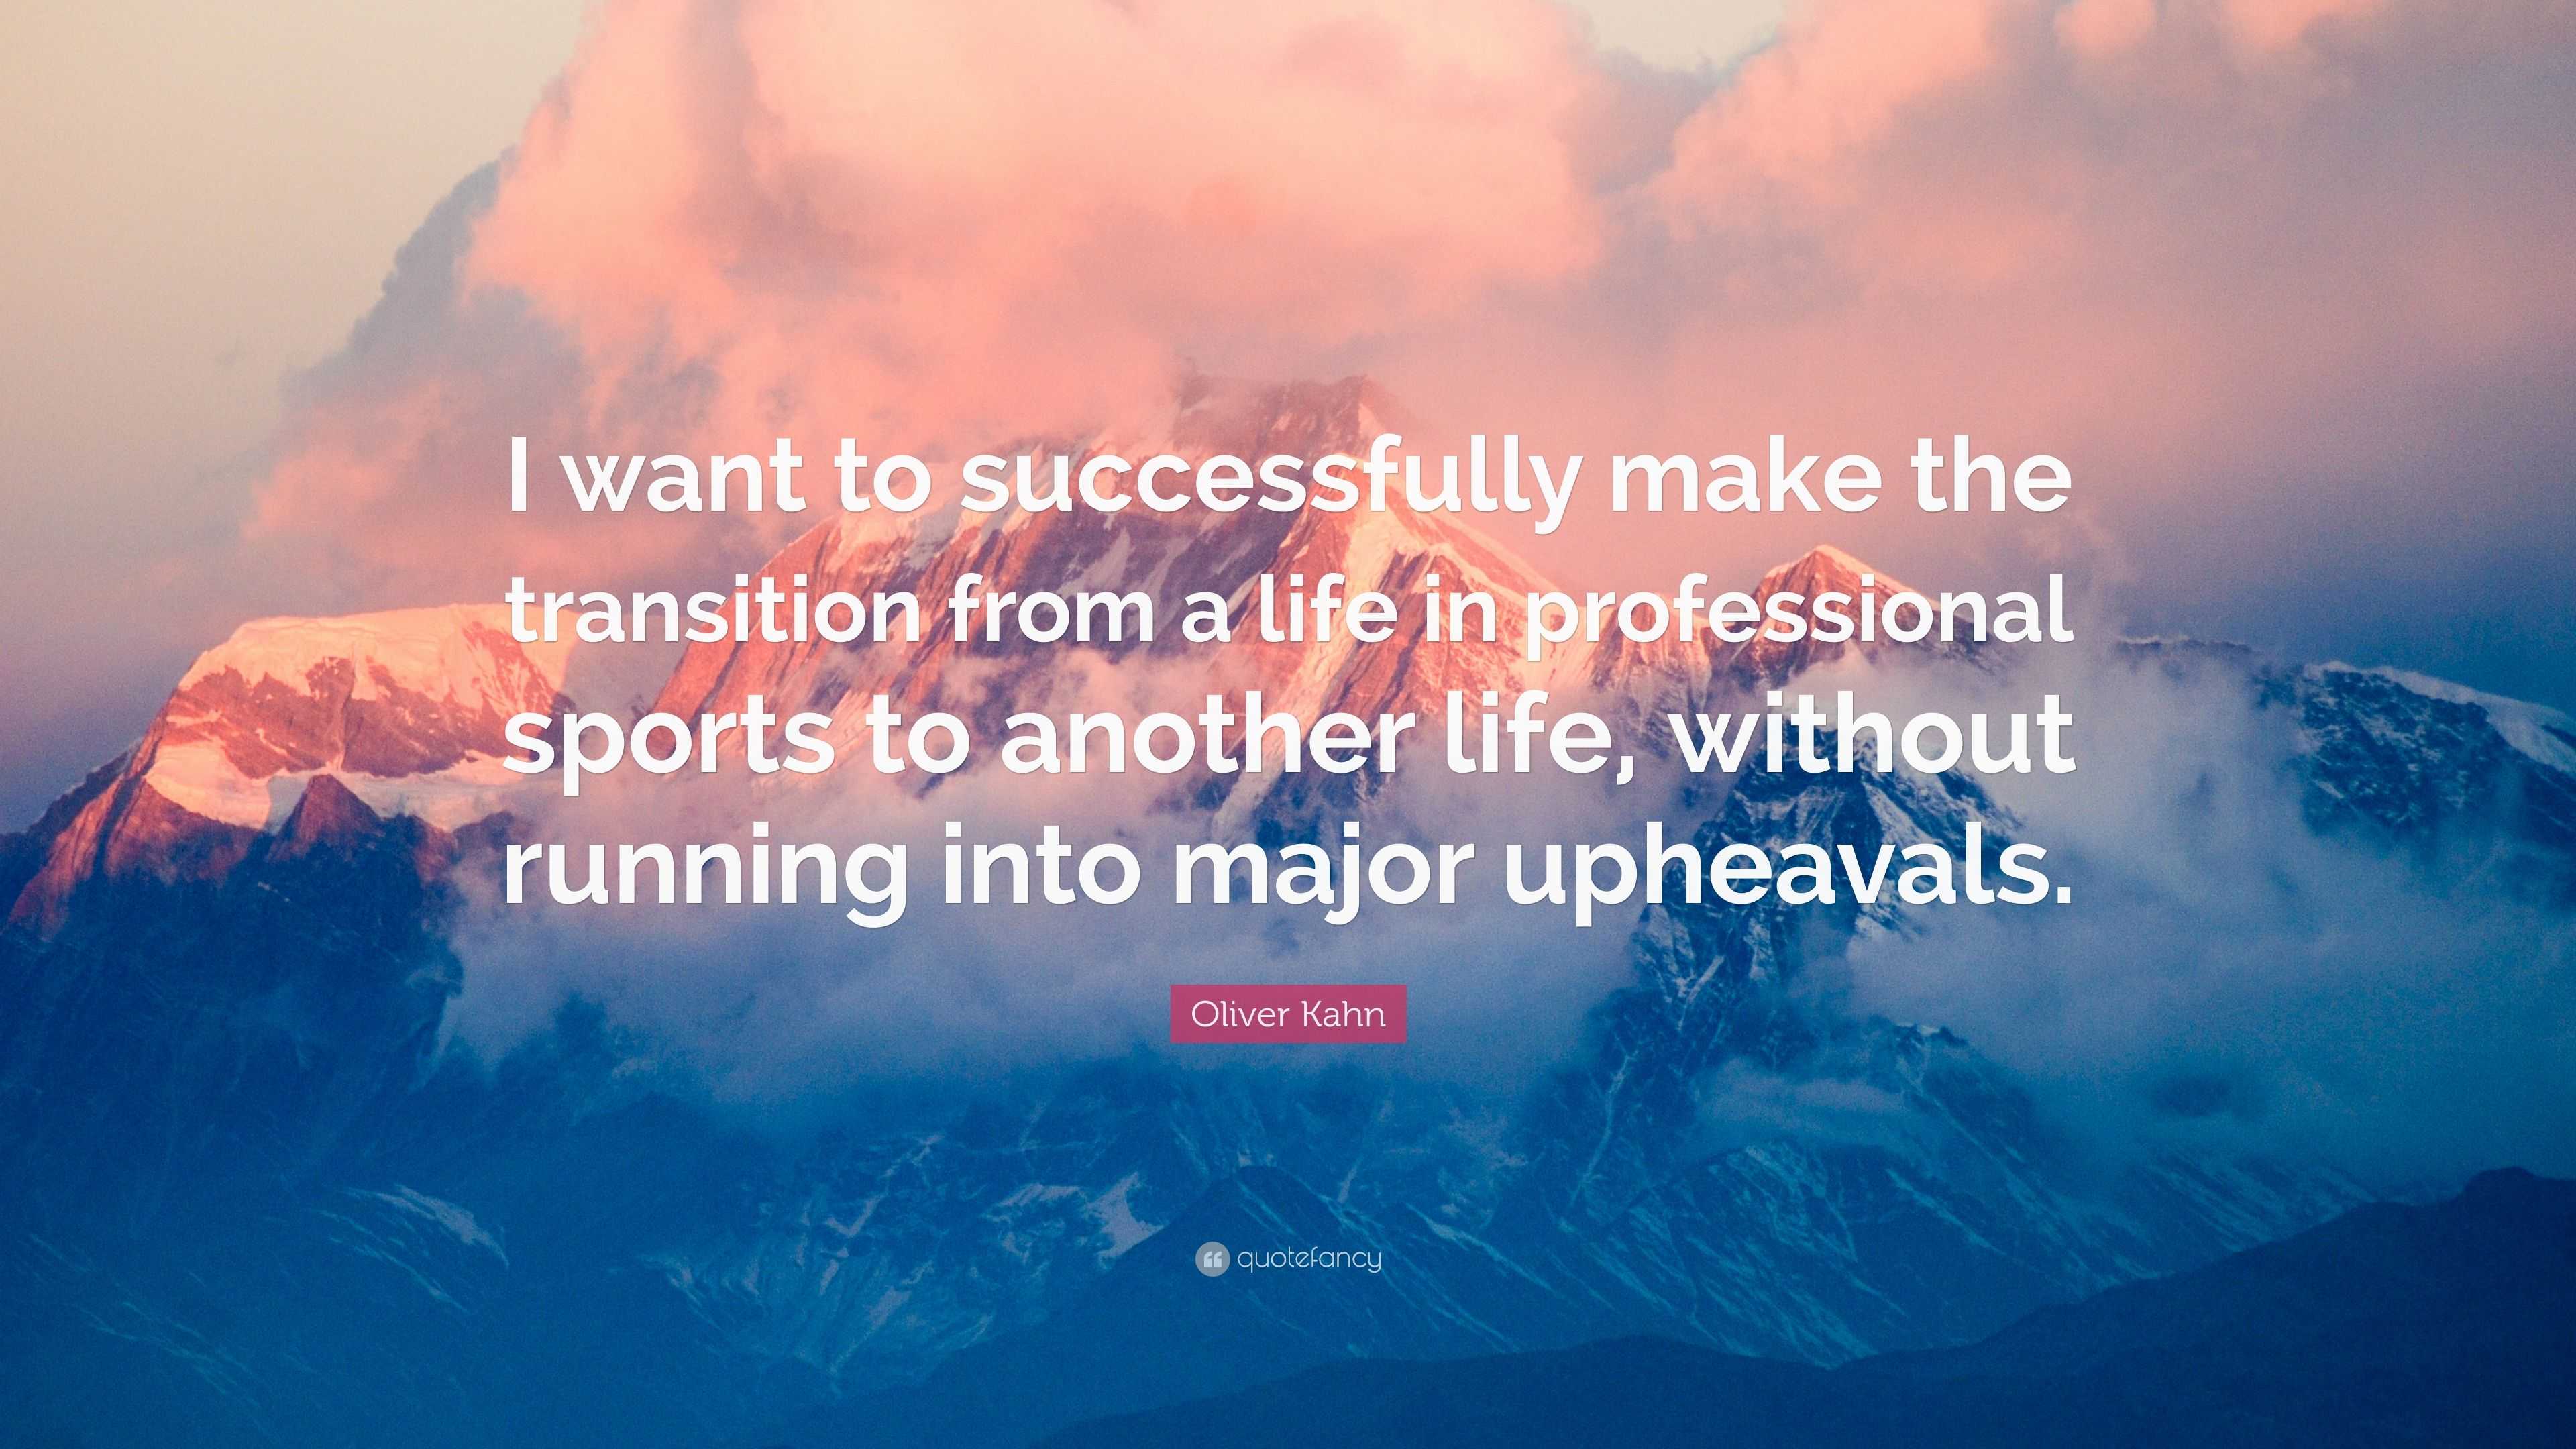 Oliver Kahn Quote “I want to successfully make the transition from a life in